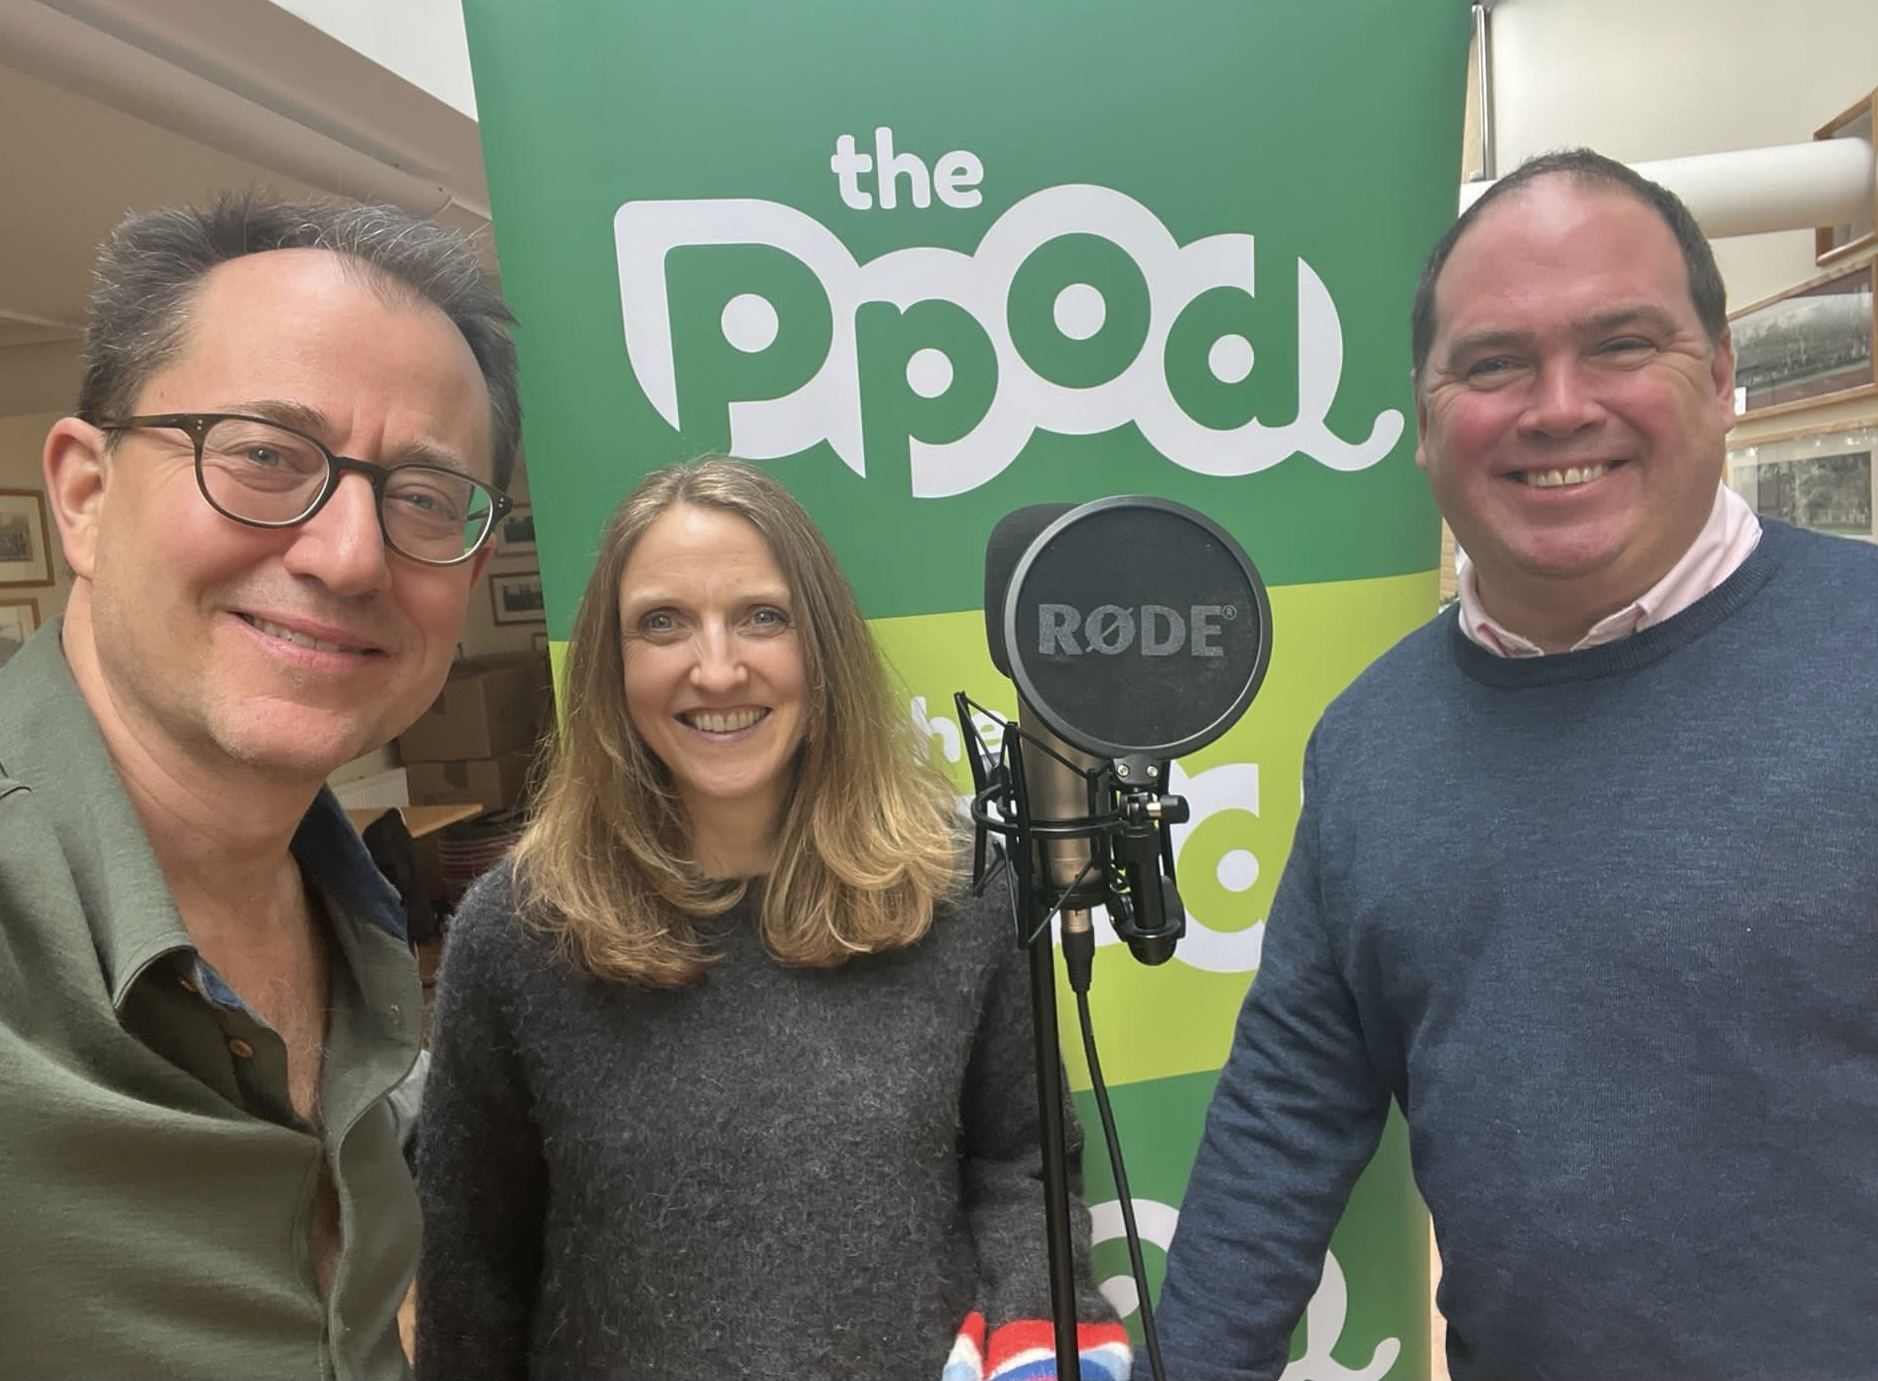 the P pod - personalities show - 20th March 2023: Radio Day